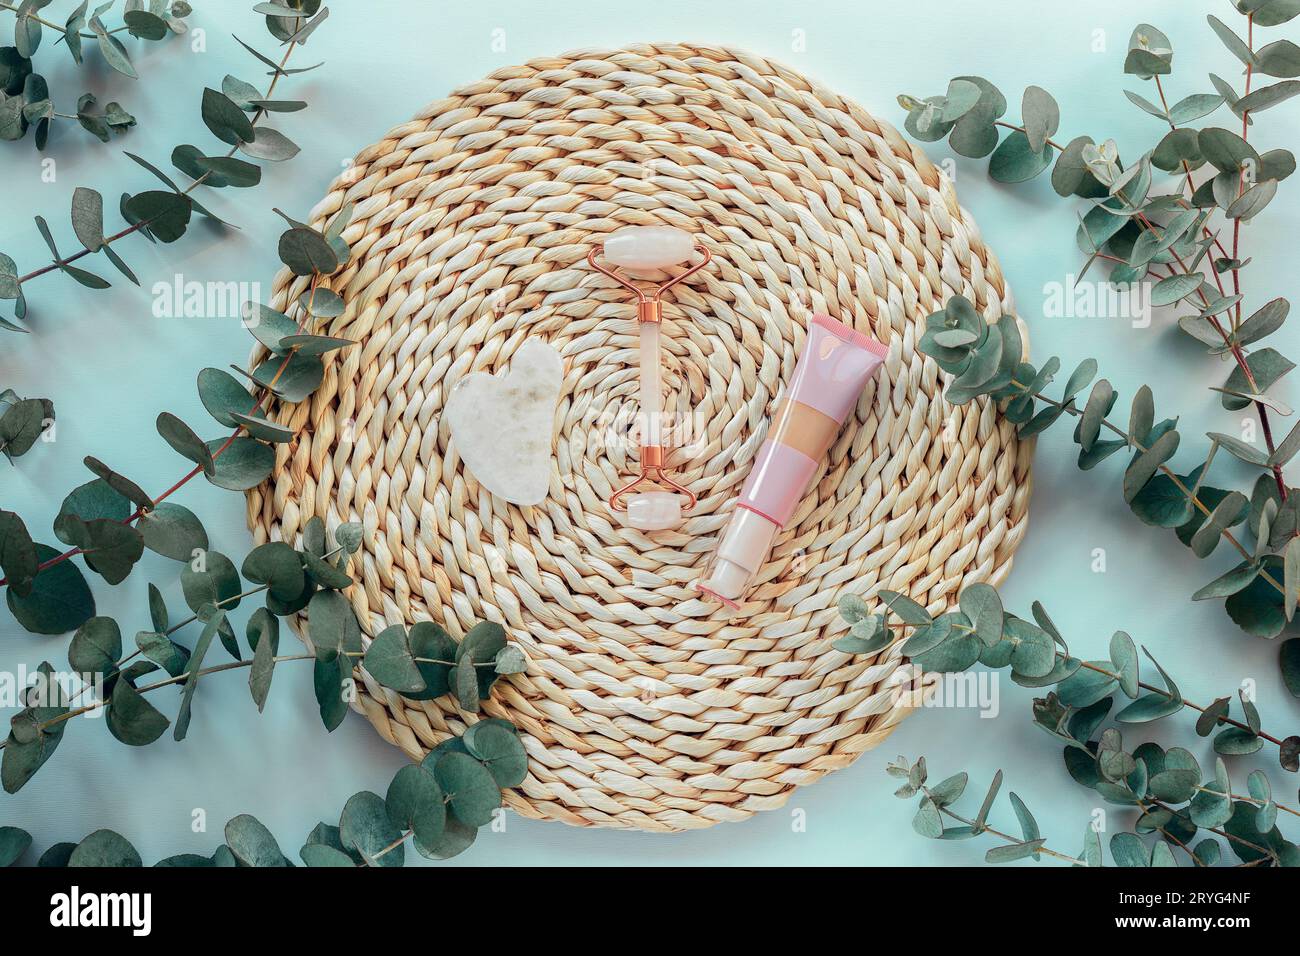 Gua sha stone, face roller and cream tube on a wicker place mat with eucalyptus branches on light blue table. Skin care, beauty treatment concept. Top Stock Photo